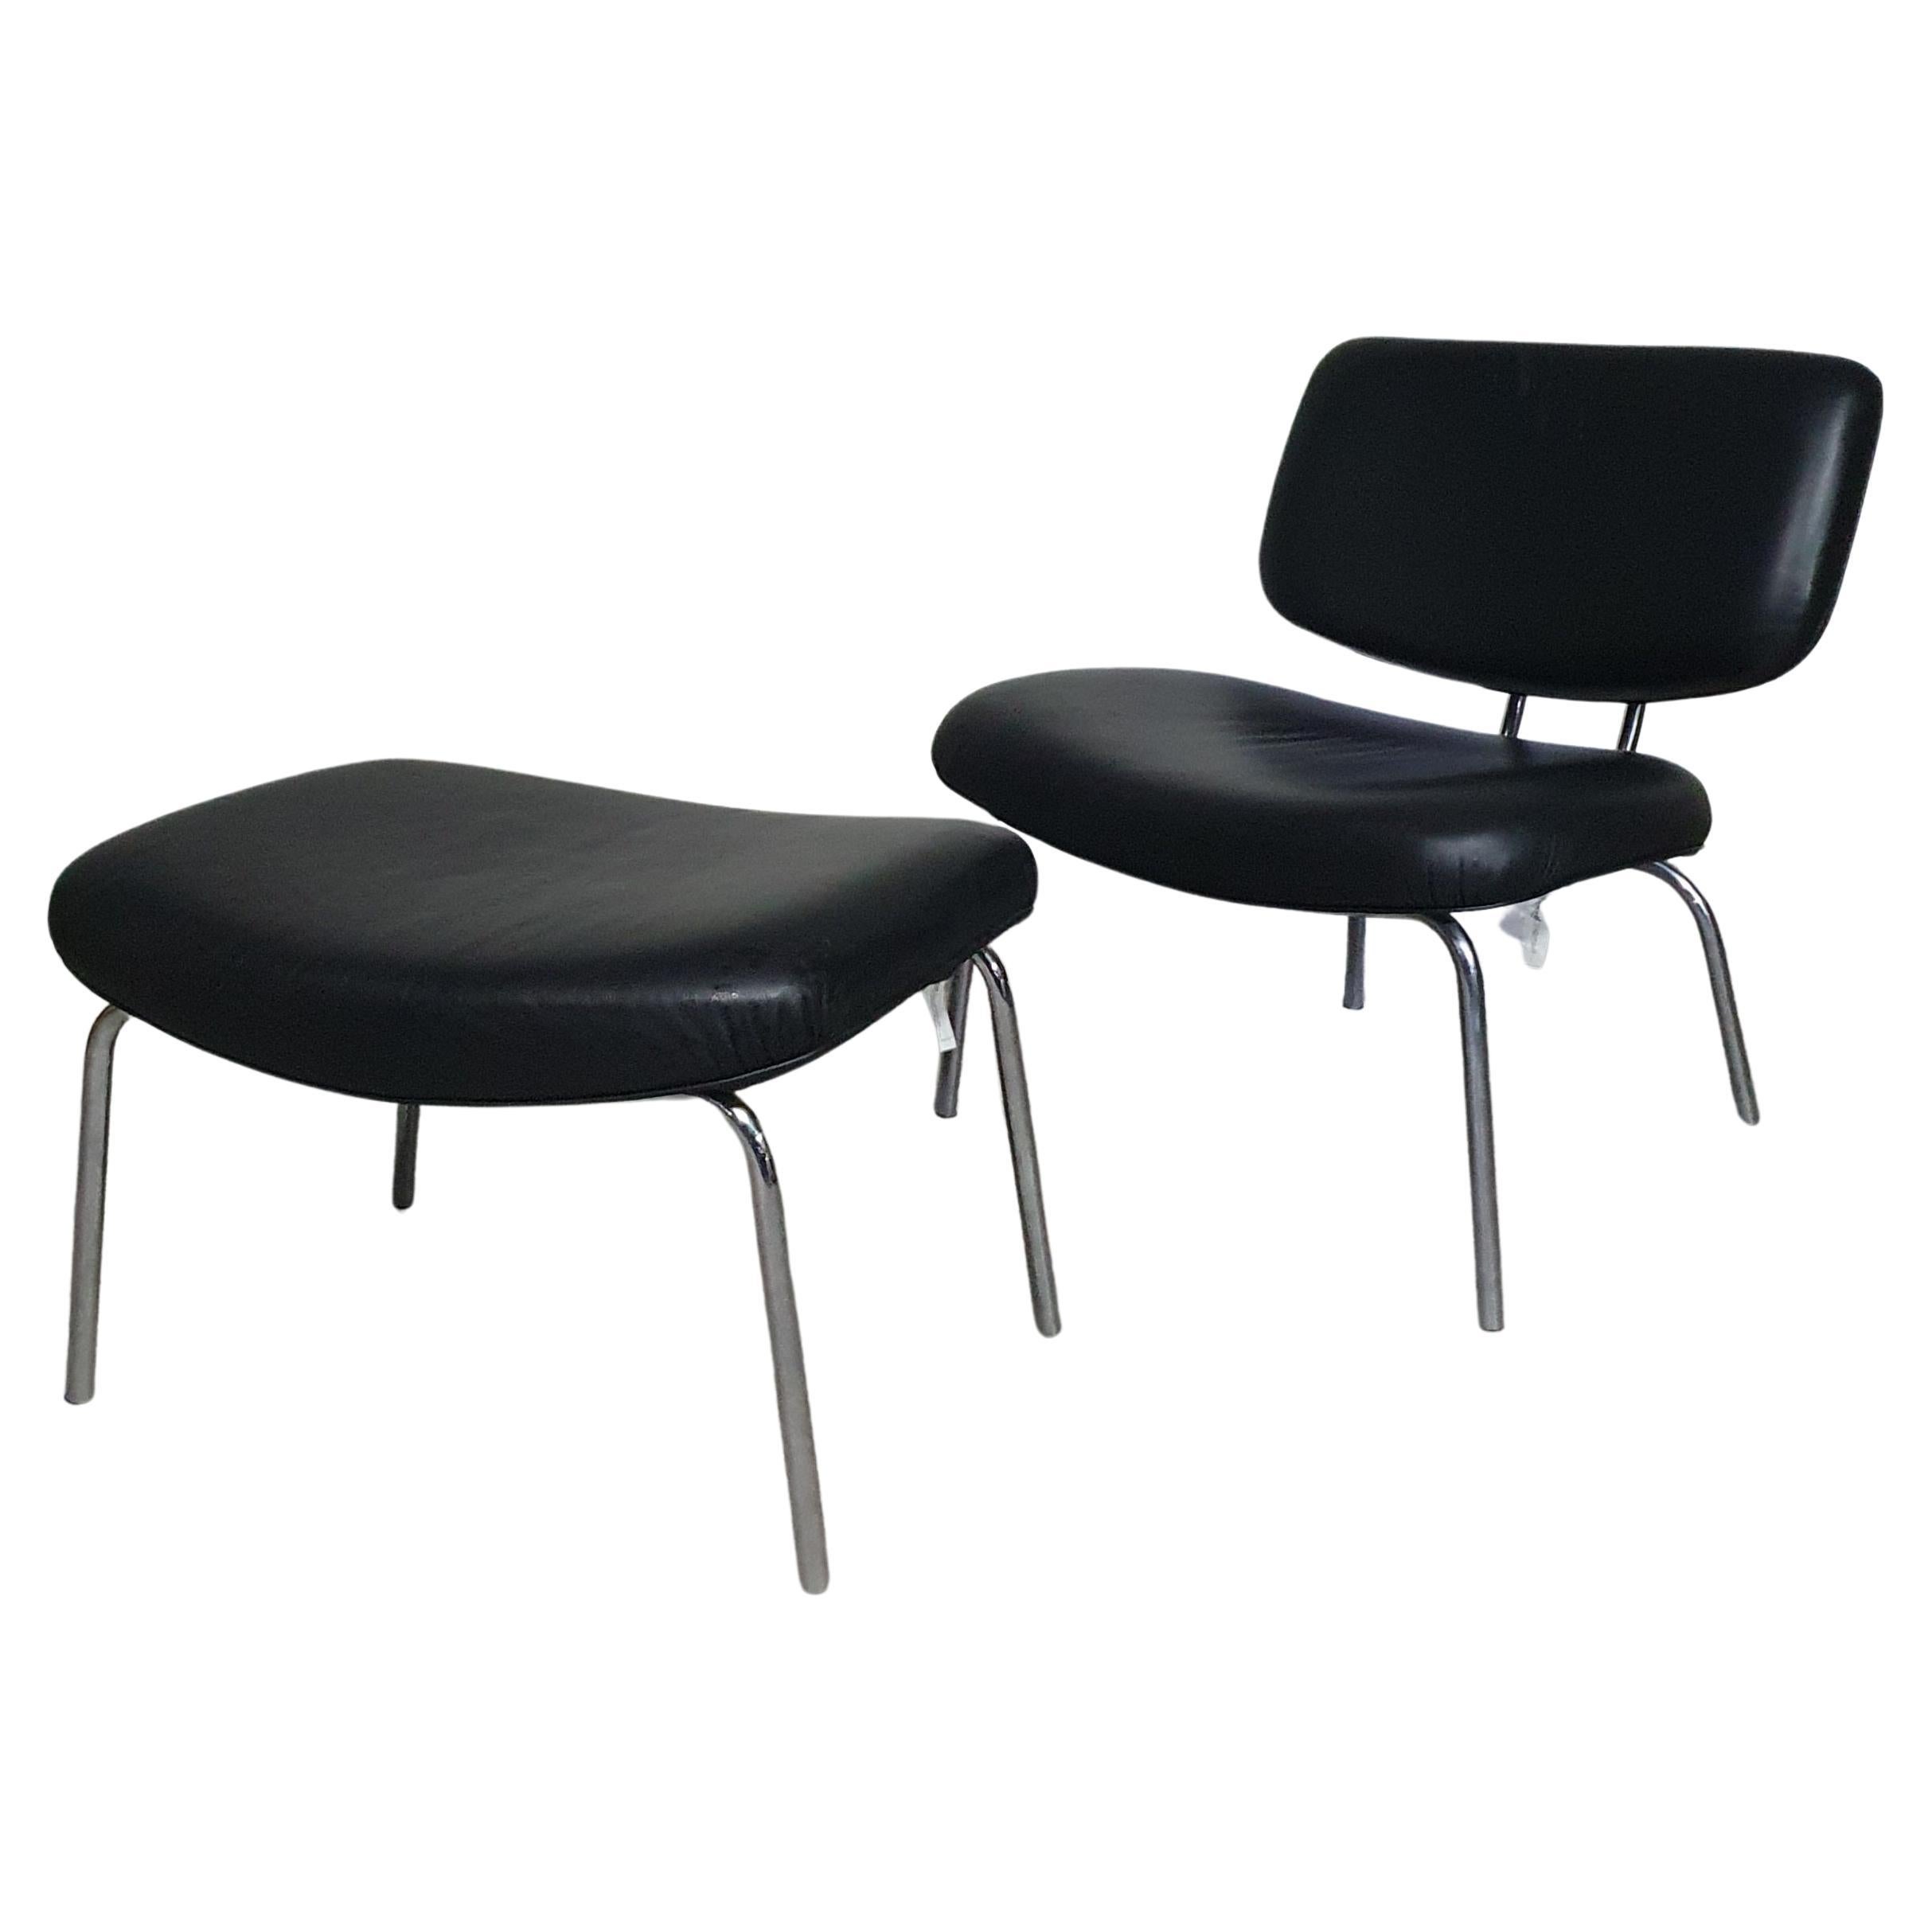 Zanotta Clea lounge chair / pouf in black leather / 1997 by Kristiina Lassus For Sale